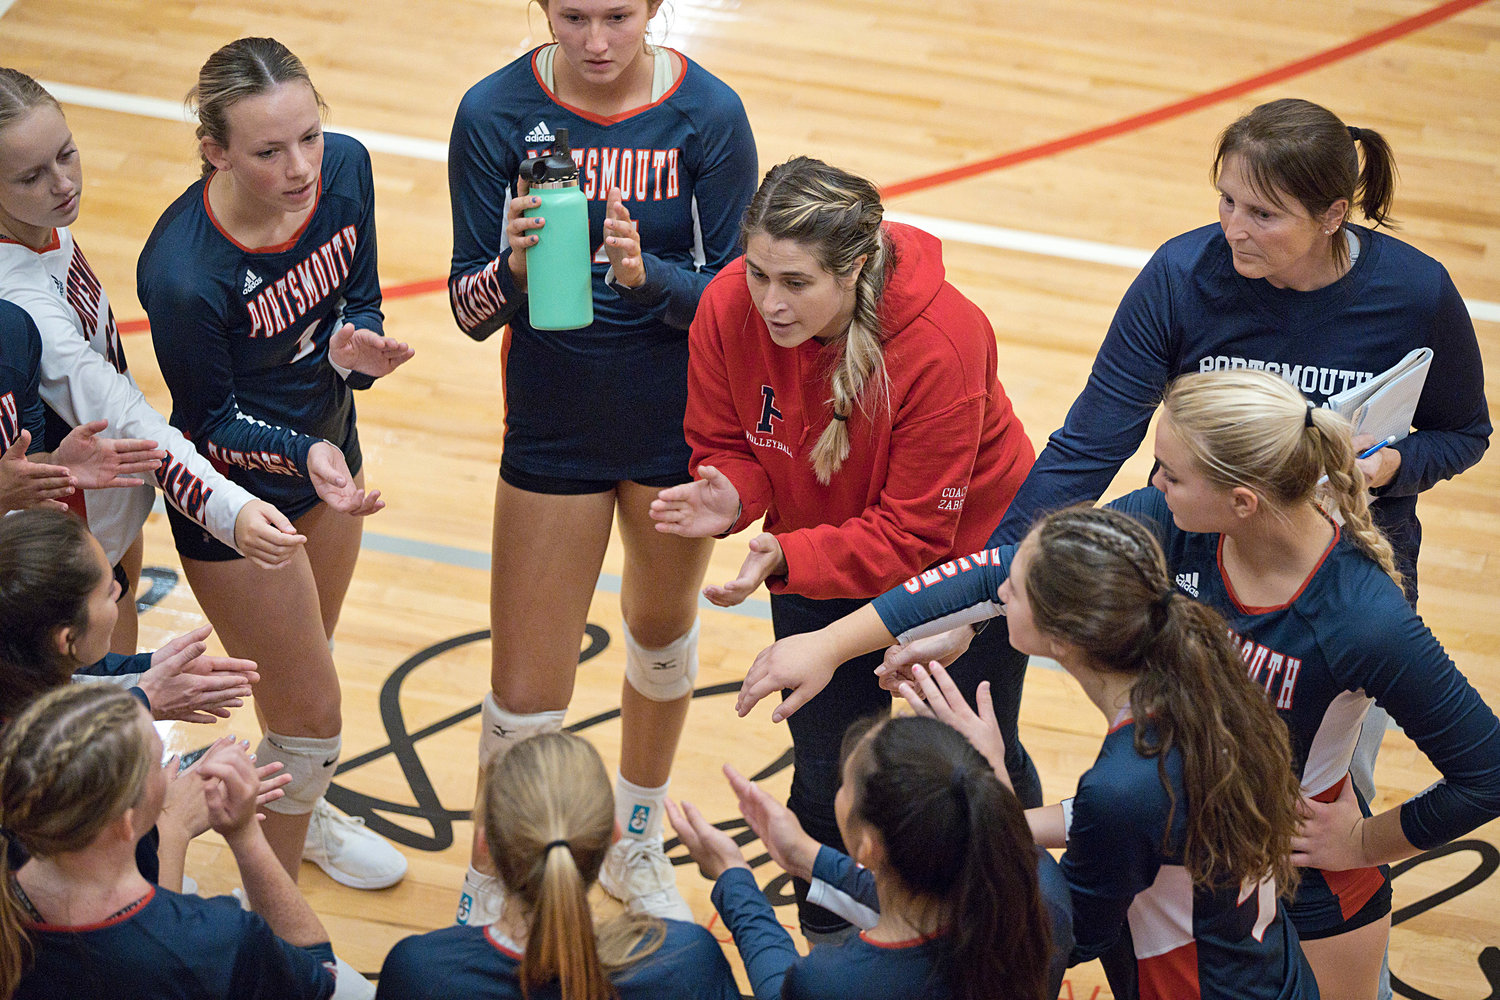 Head coach Lisa Zabel encourages her team between sets during Friday's match against East Providence.